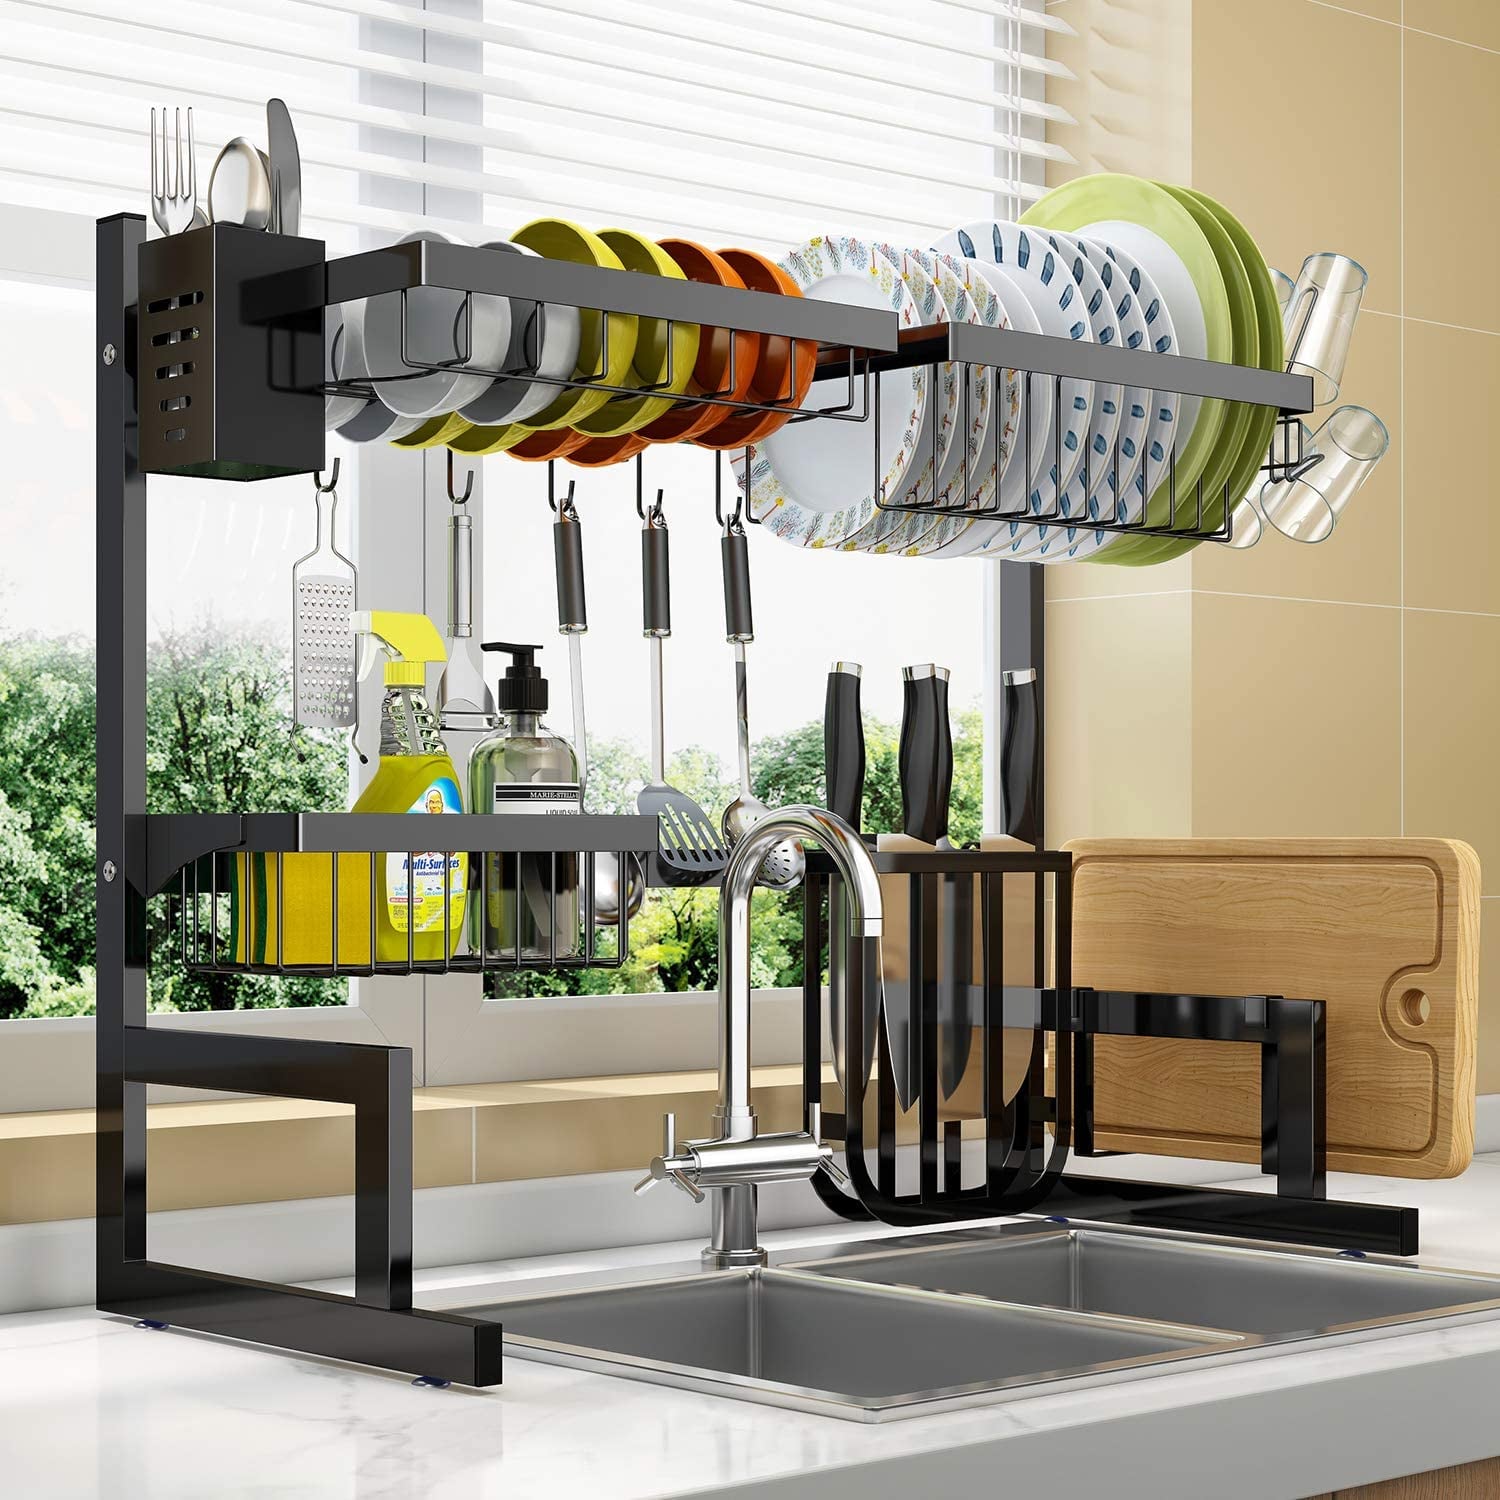 A Kitchen Space-Saver: Over the Sink Adjustable Dish Drying Rack